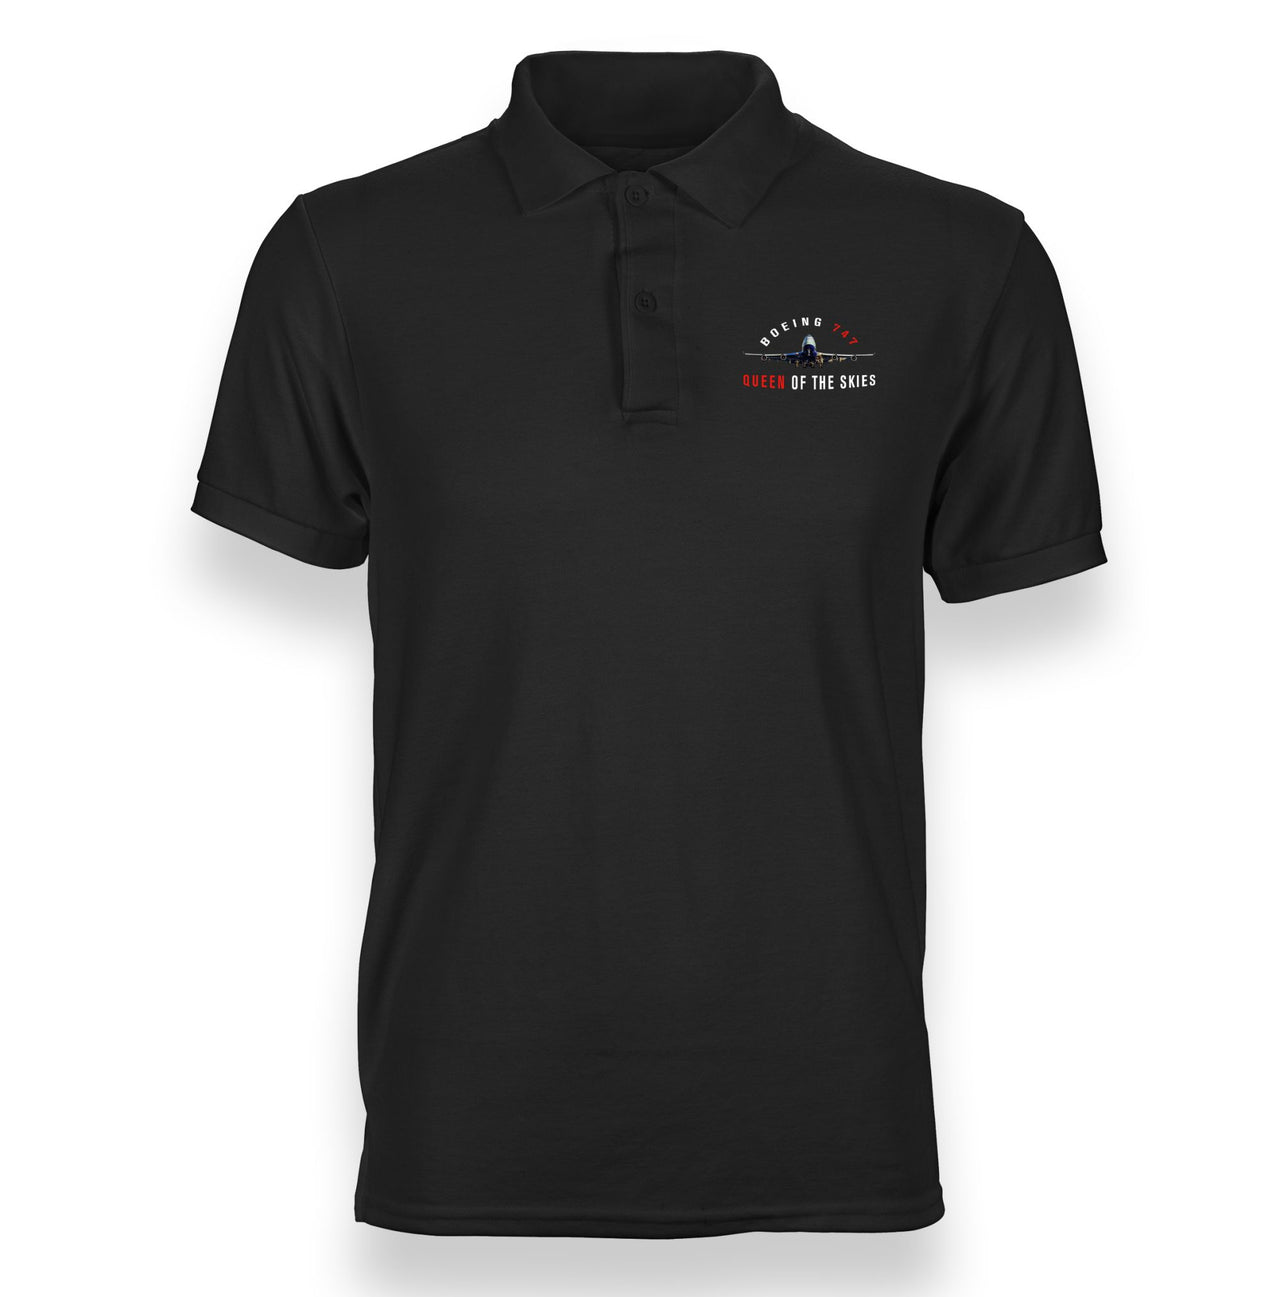 Boeing 747 Queen of the Skies Designed "WOMEN" Polo T-Shirts